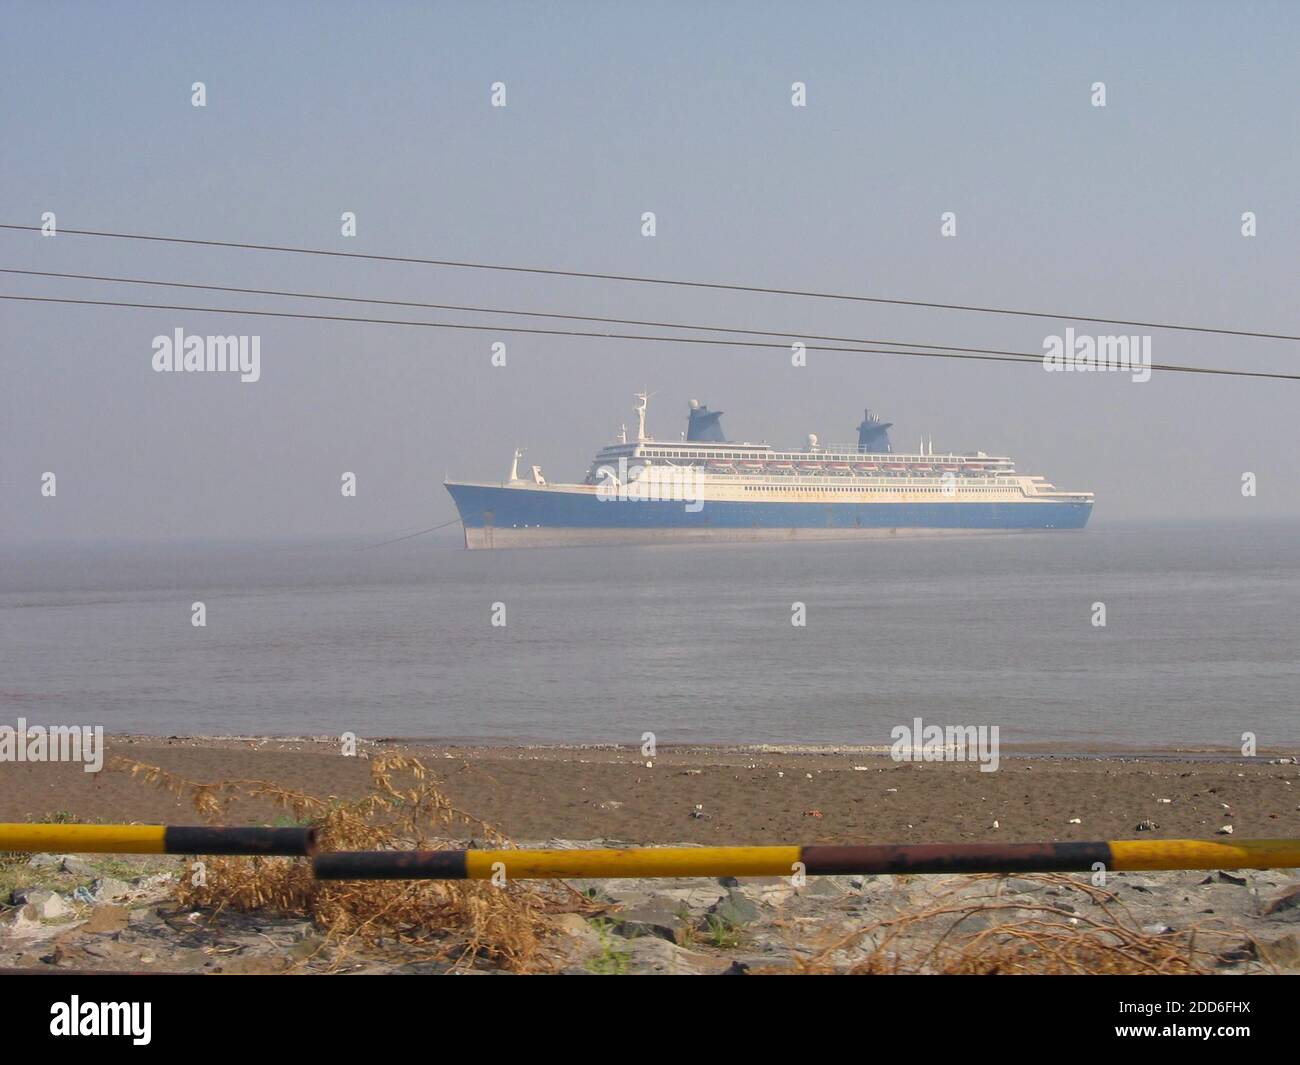 NO FILM, NO VIDEO, NO TV, NO DOCUMENTARY - The Blue Lady, formerly the SS Norway, (former last French liner France) has been run aground in shallow waters at the ship breaking yards in Alang, India, on November 8, 2006. Photo by Ken Moritsugu/MCT/ABACAPRESS.COM Stock Photo